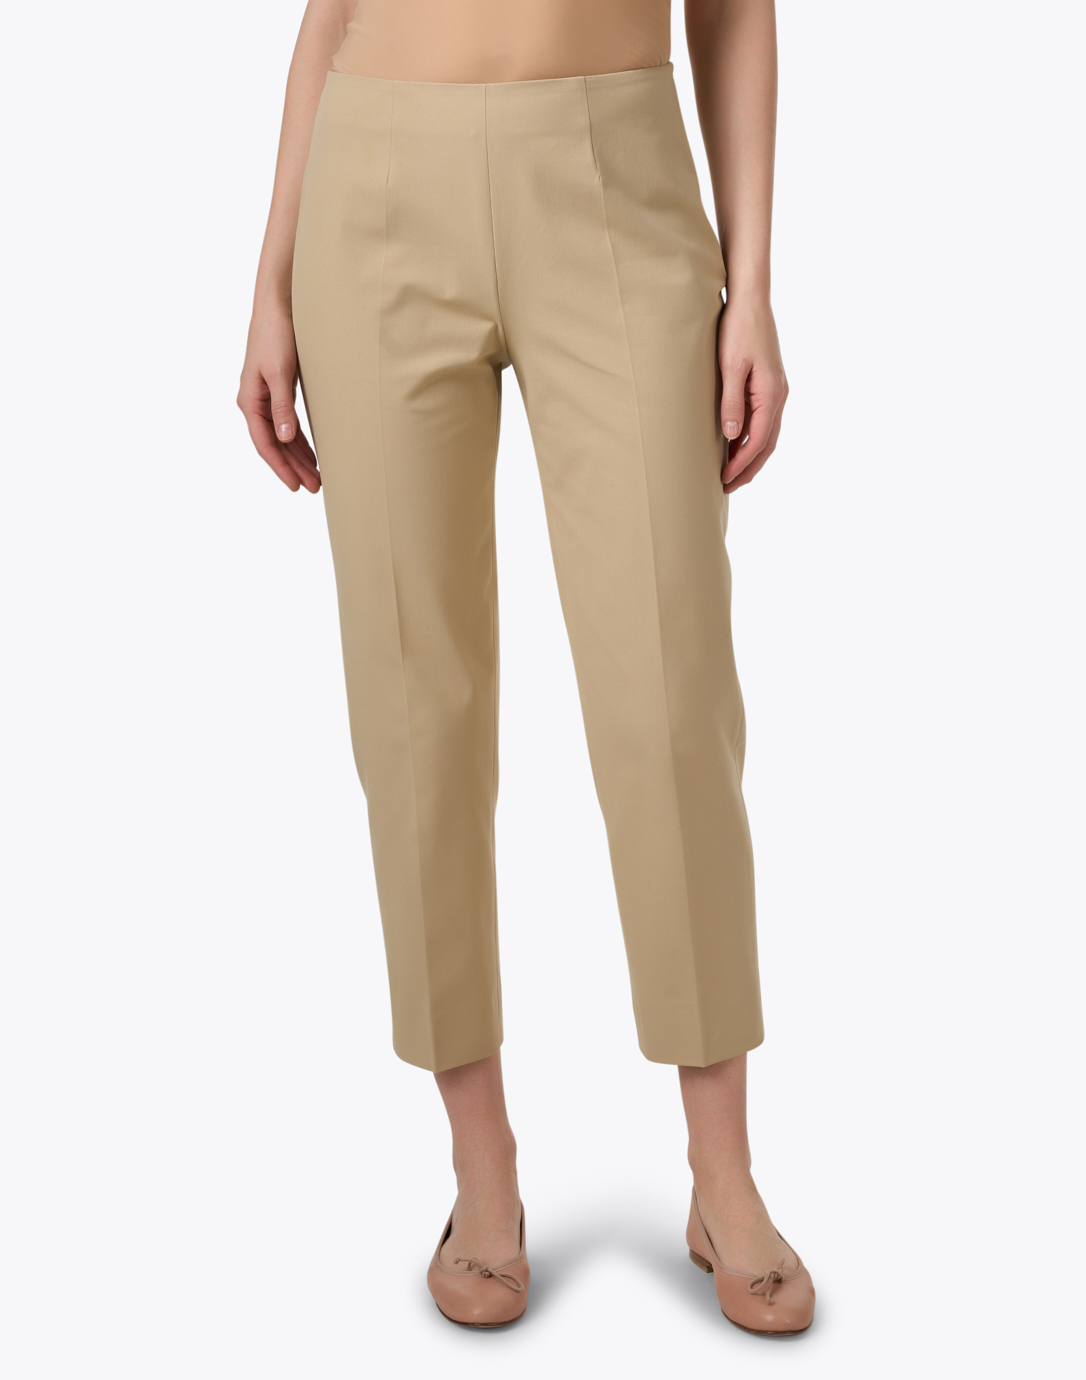 O'Connell's Womens Cotton Sateen Slim Capri Pant - Provence